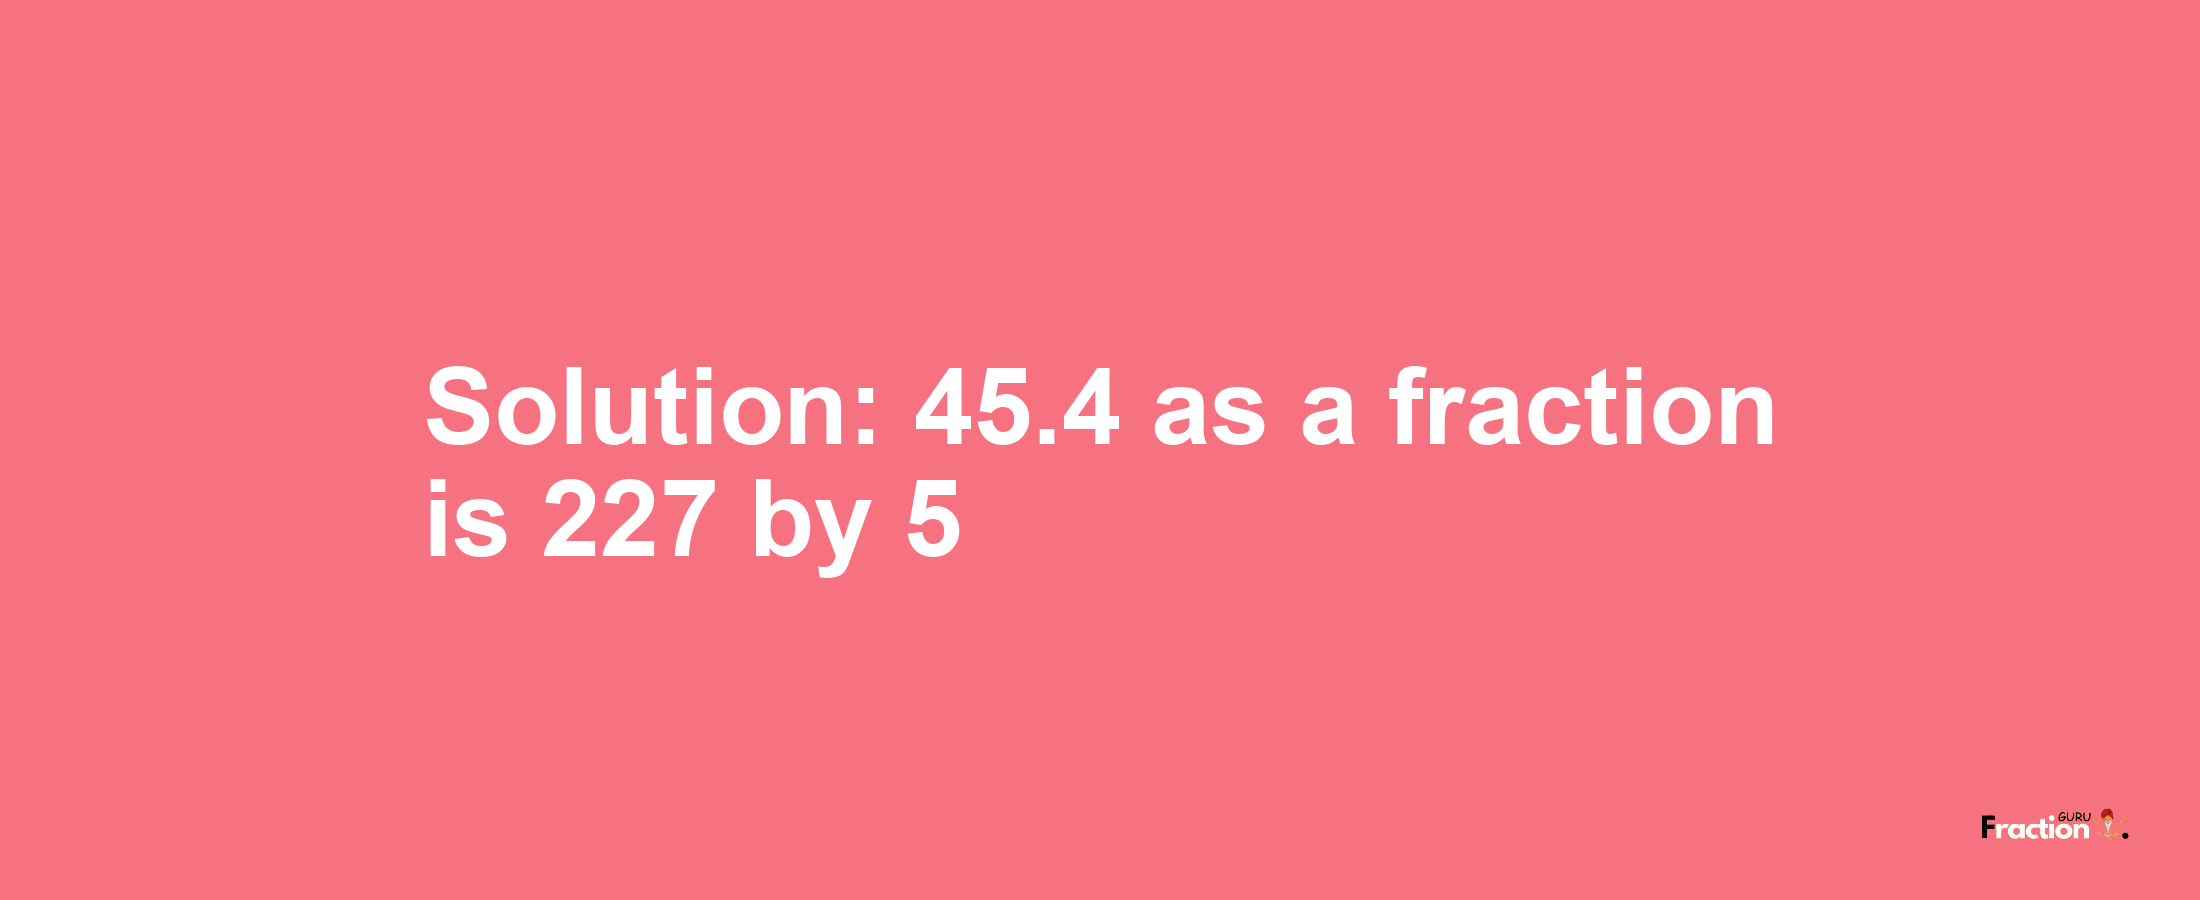 Solution:45.4 as a fraction is 227/5